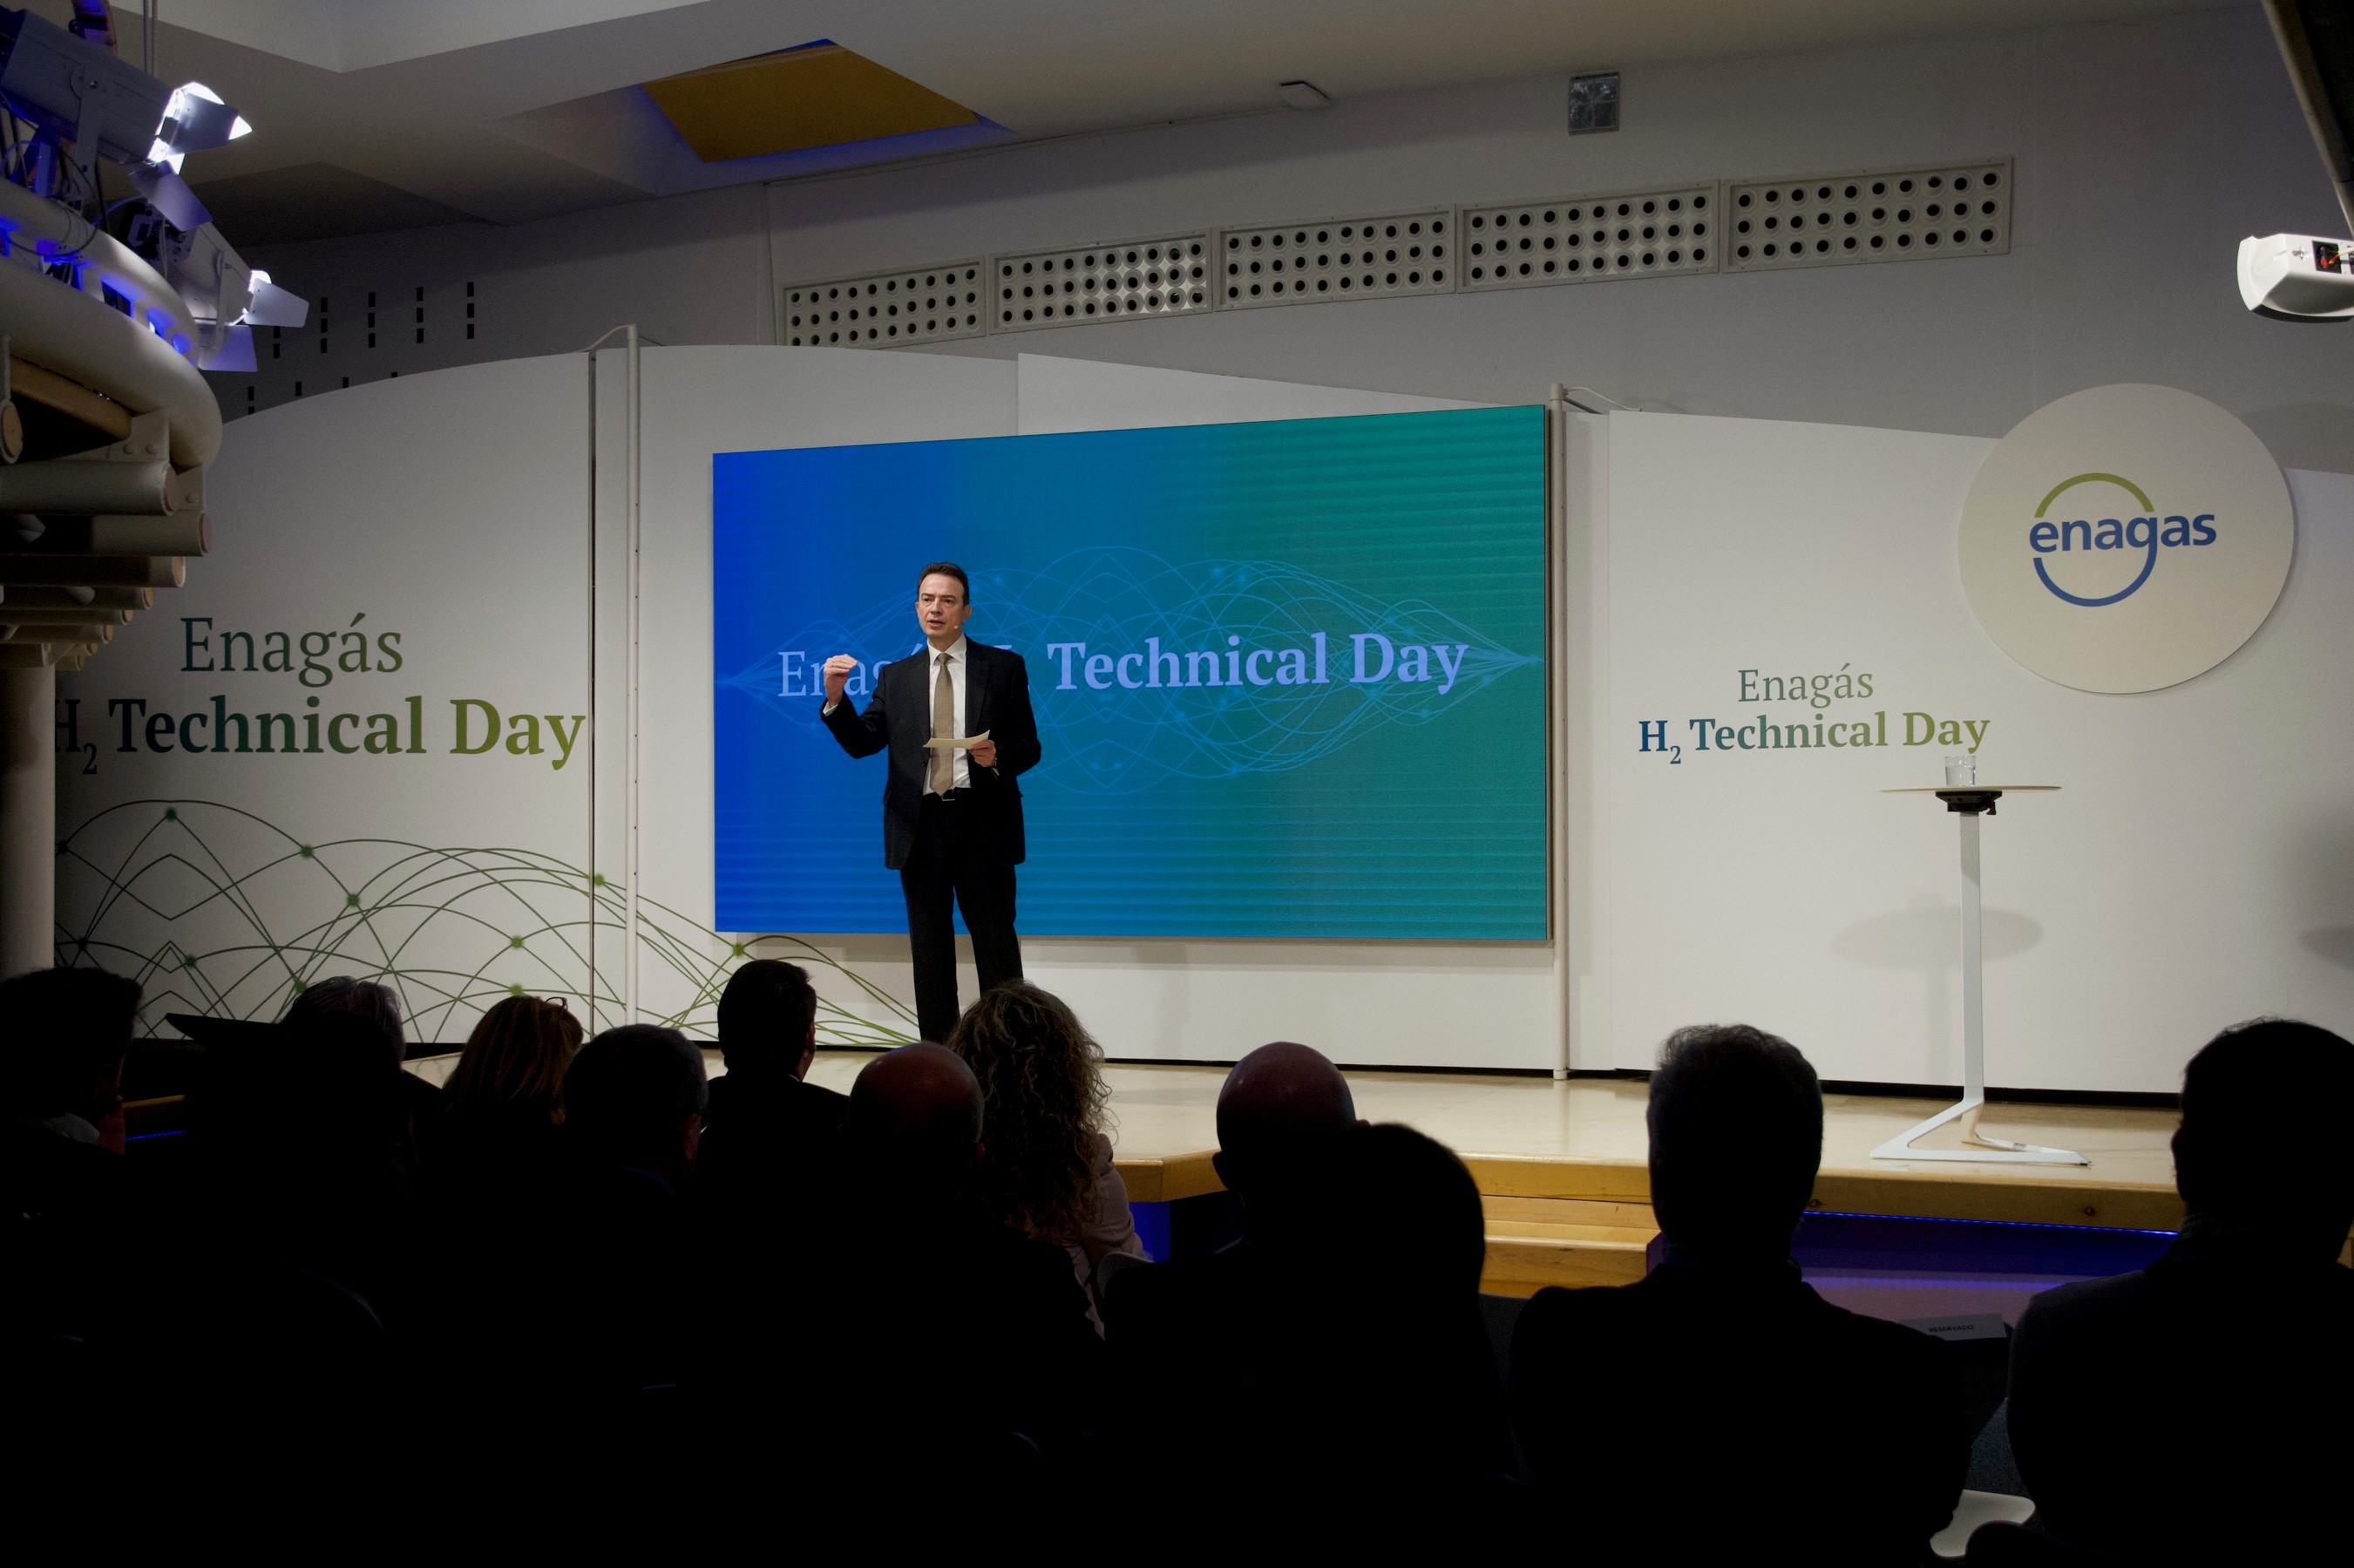 Enagás CEO speaking at an event